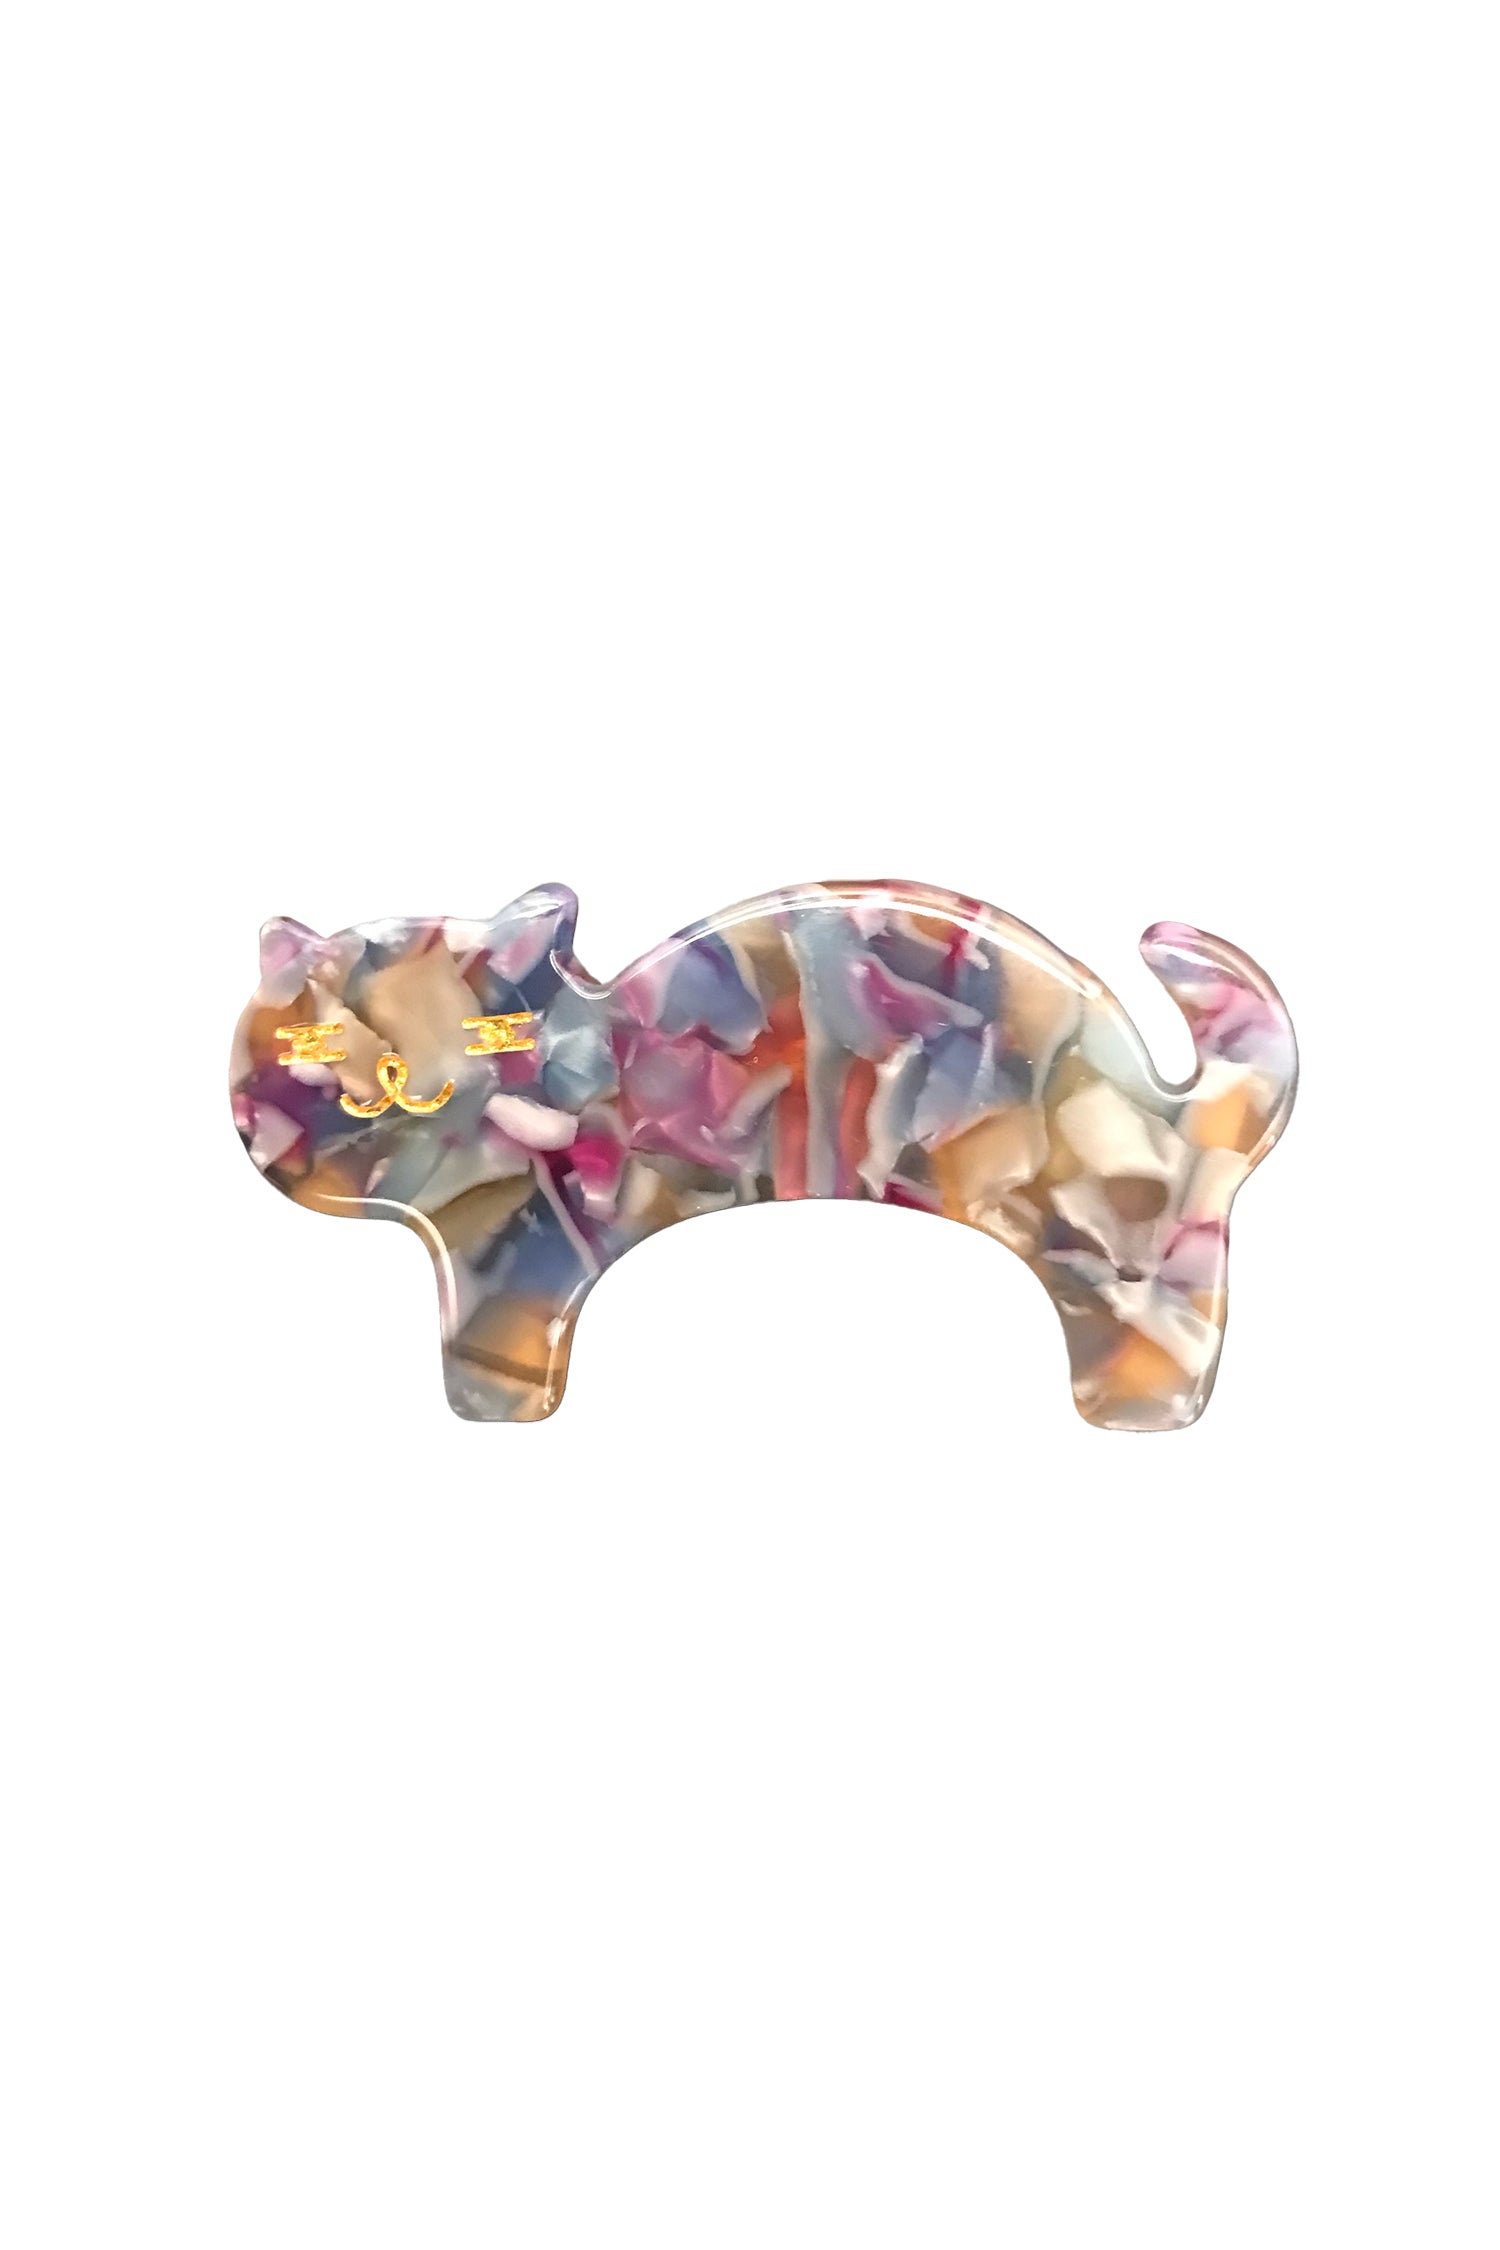 Cat Hair Clamp, full stylized cat on his side with golden highlight, pastel mixt of blue beige and red  